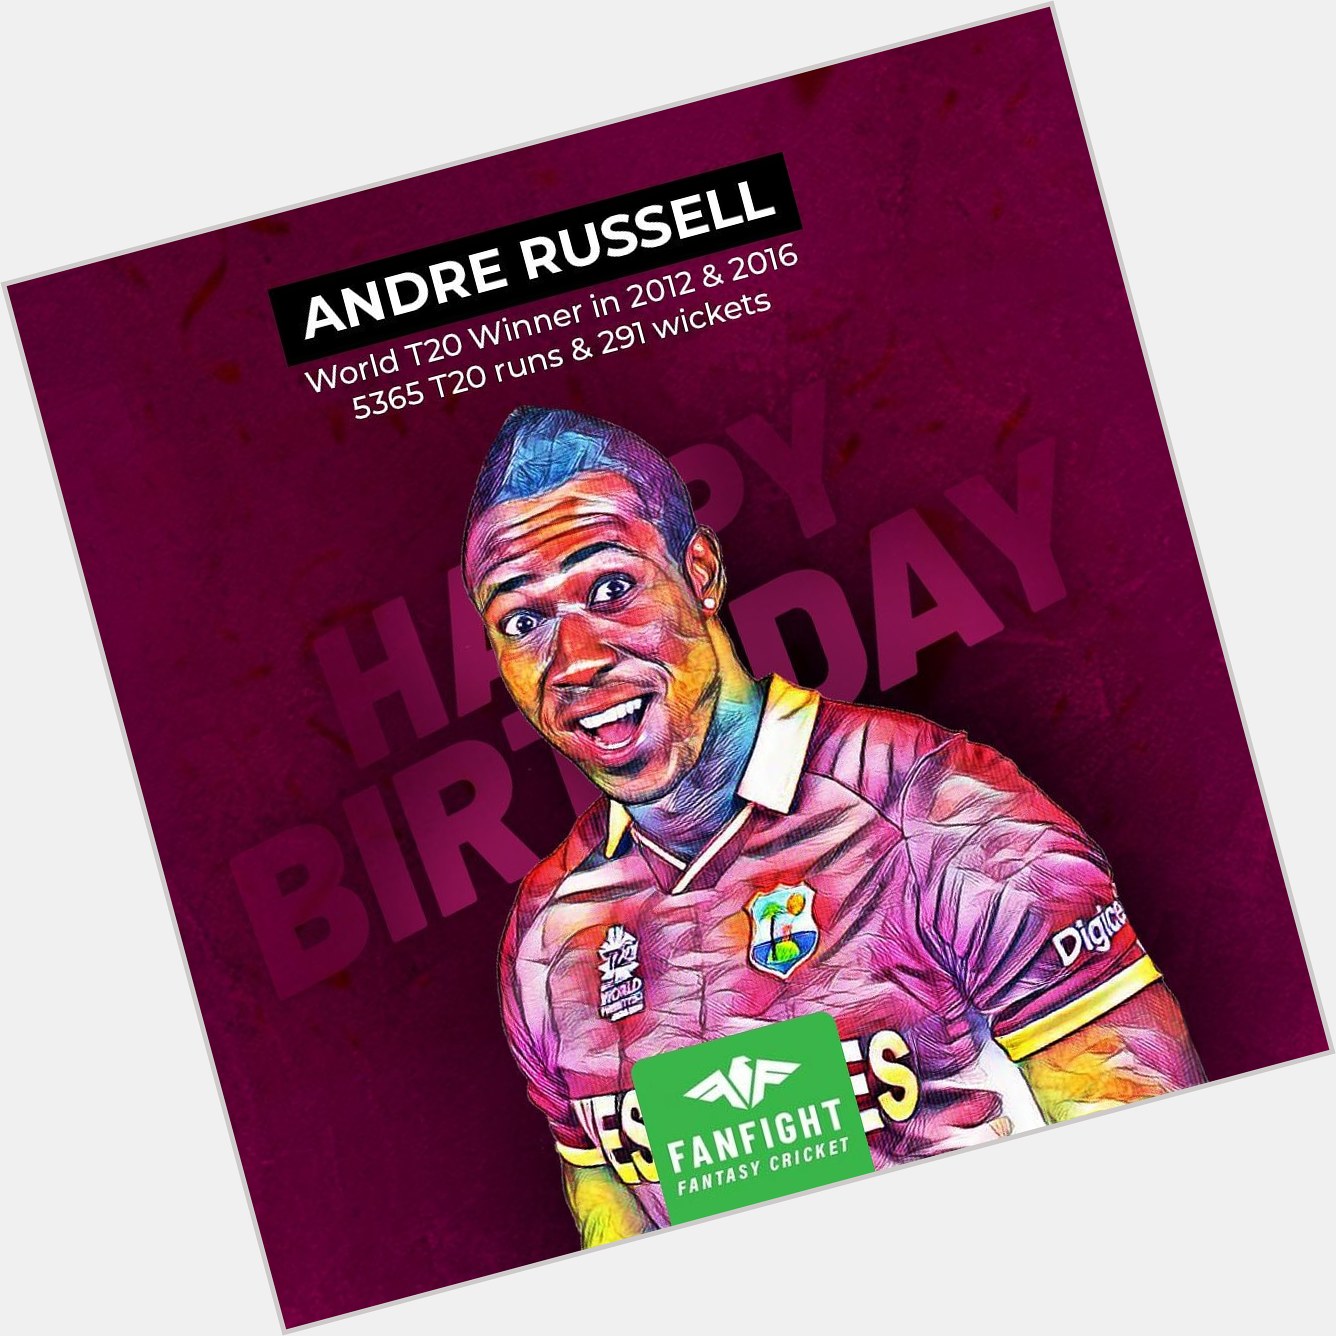 Happy Birthday Andre Russell  Which Dre Russ innings can you recollect?  